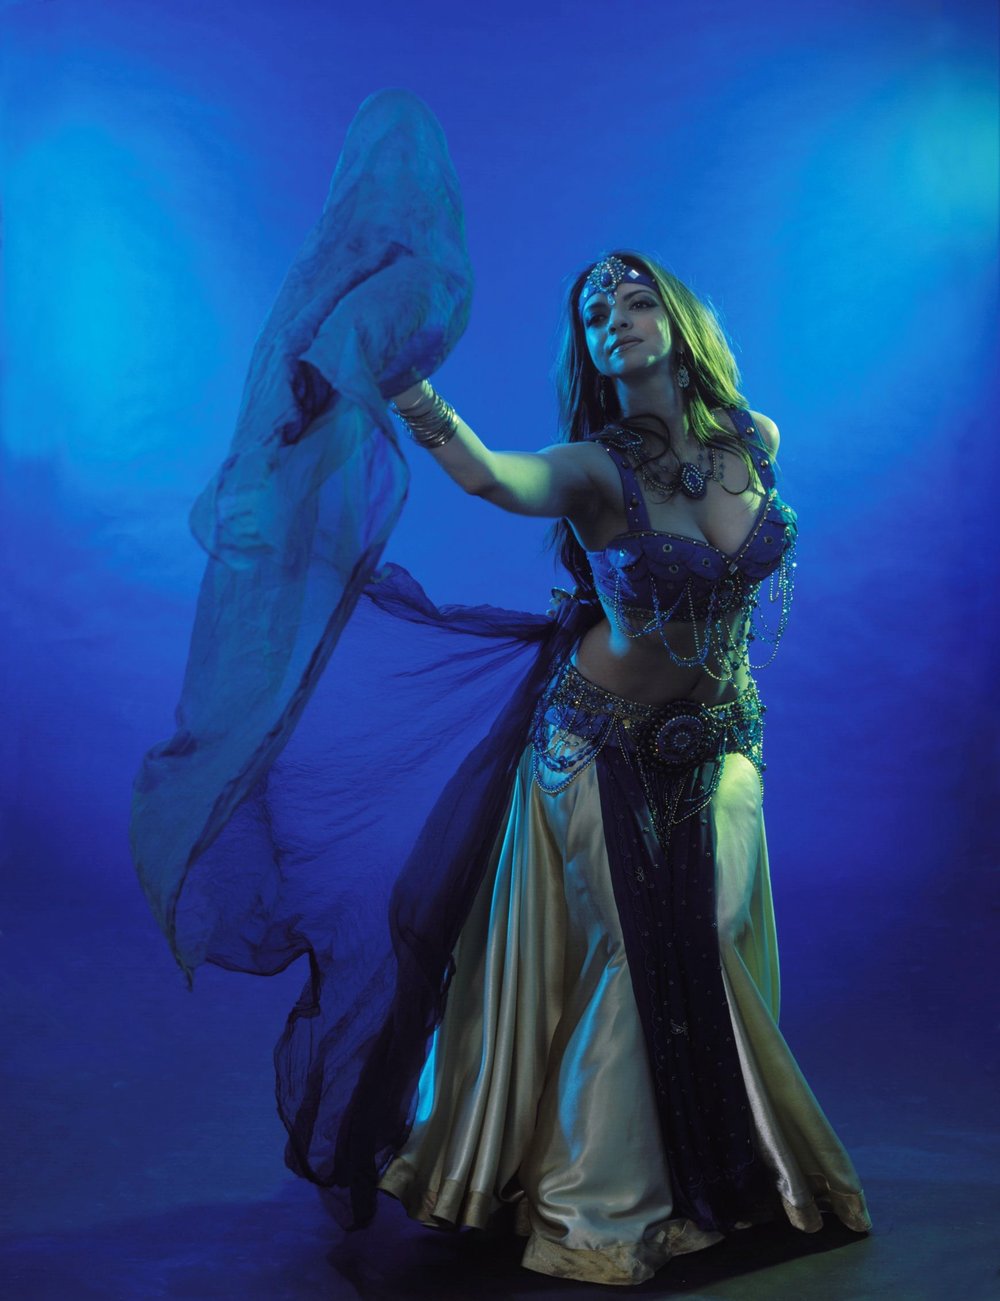 The Women Fighting Sexist, Racist Stereotypes Around Belly Dancing pic